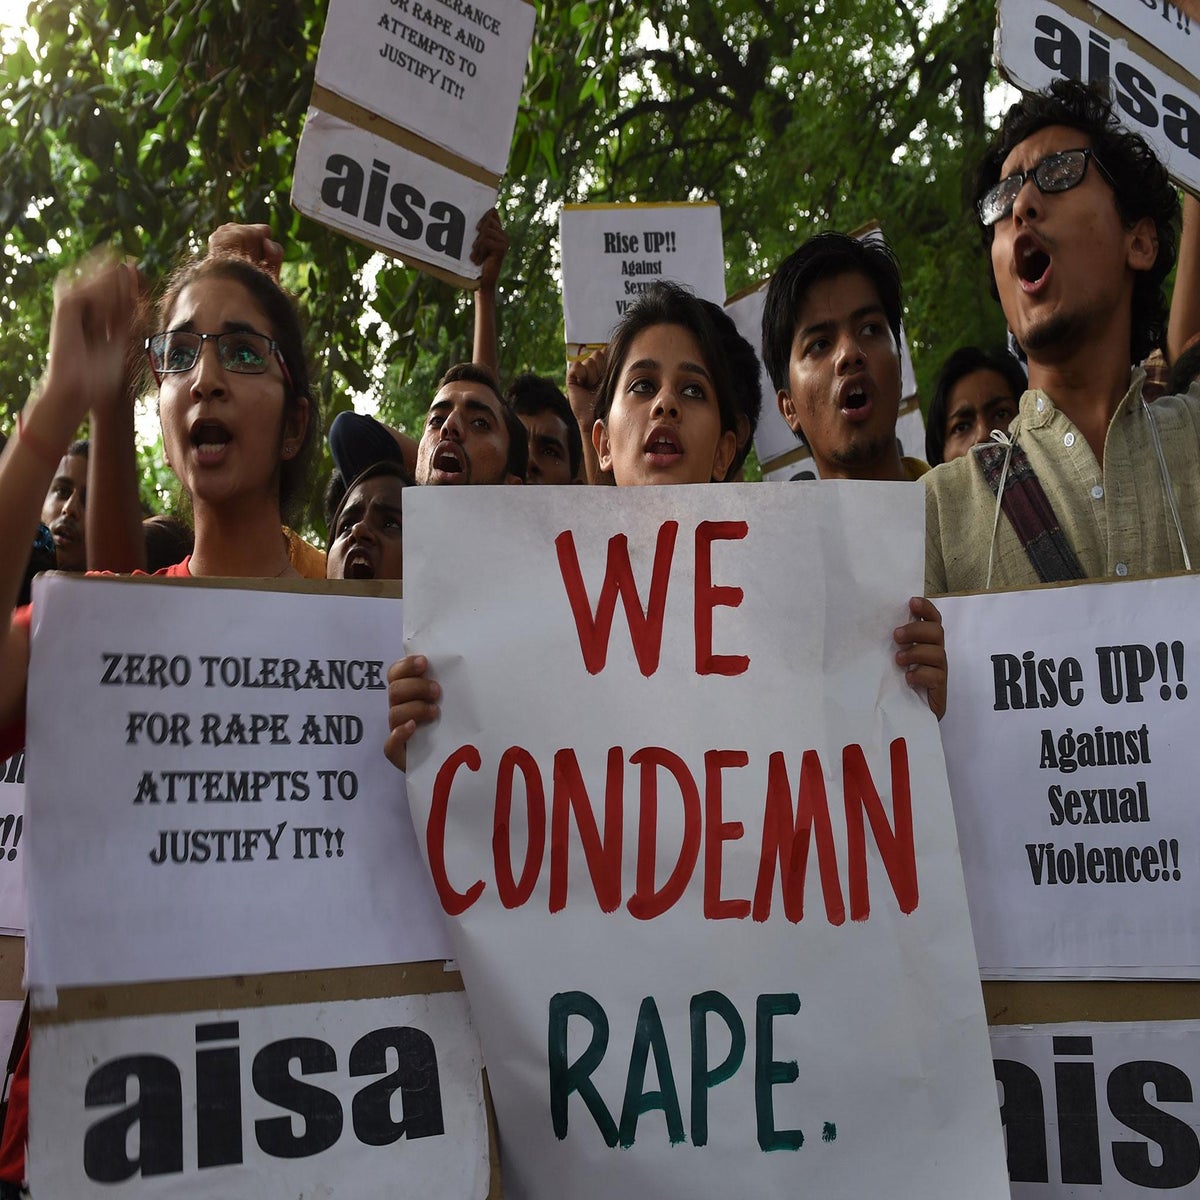 Sex Gand Rap - Gang rape' of student prompts arrests after video causes outcry in India |  The Independent | The Independent